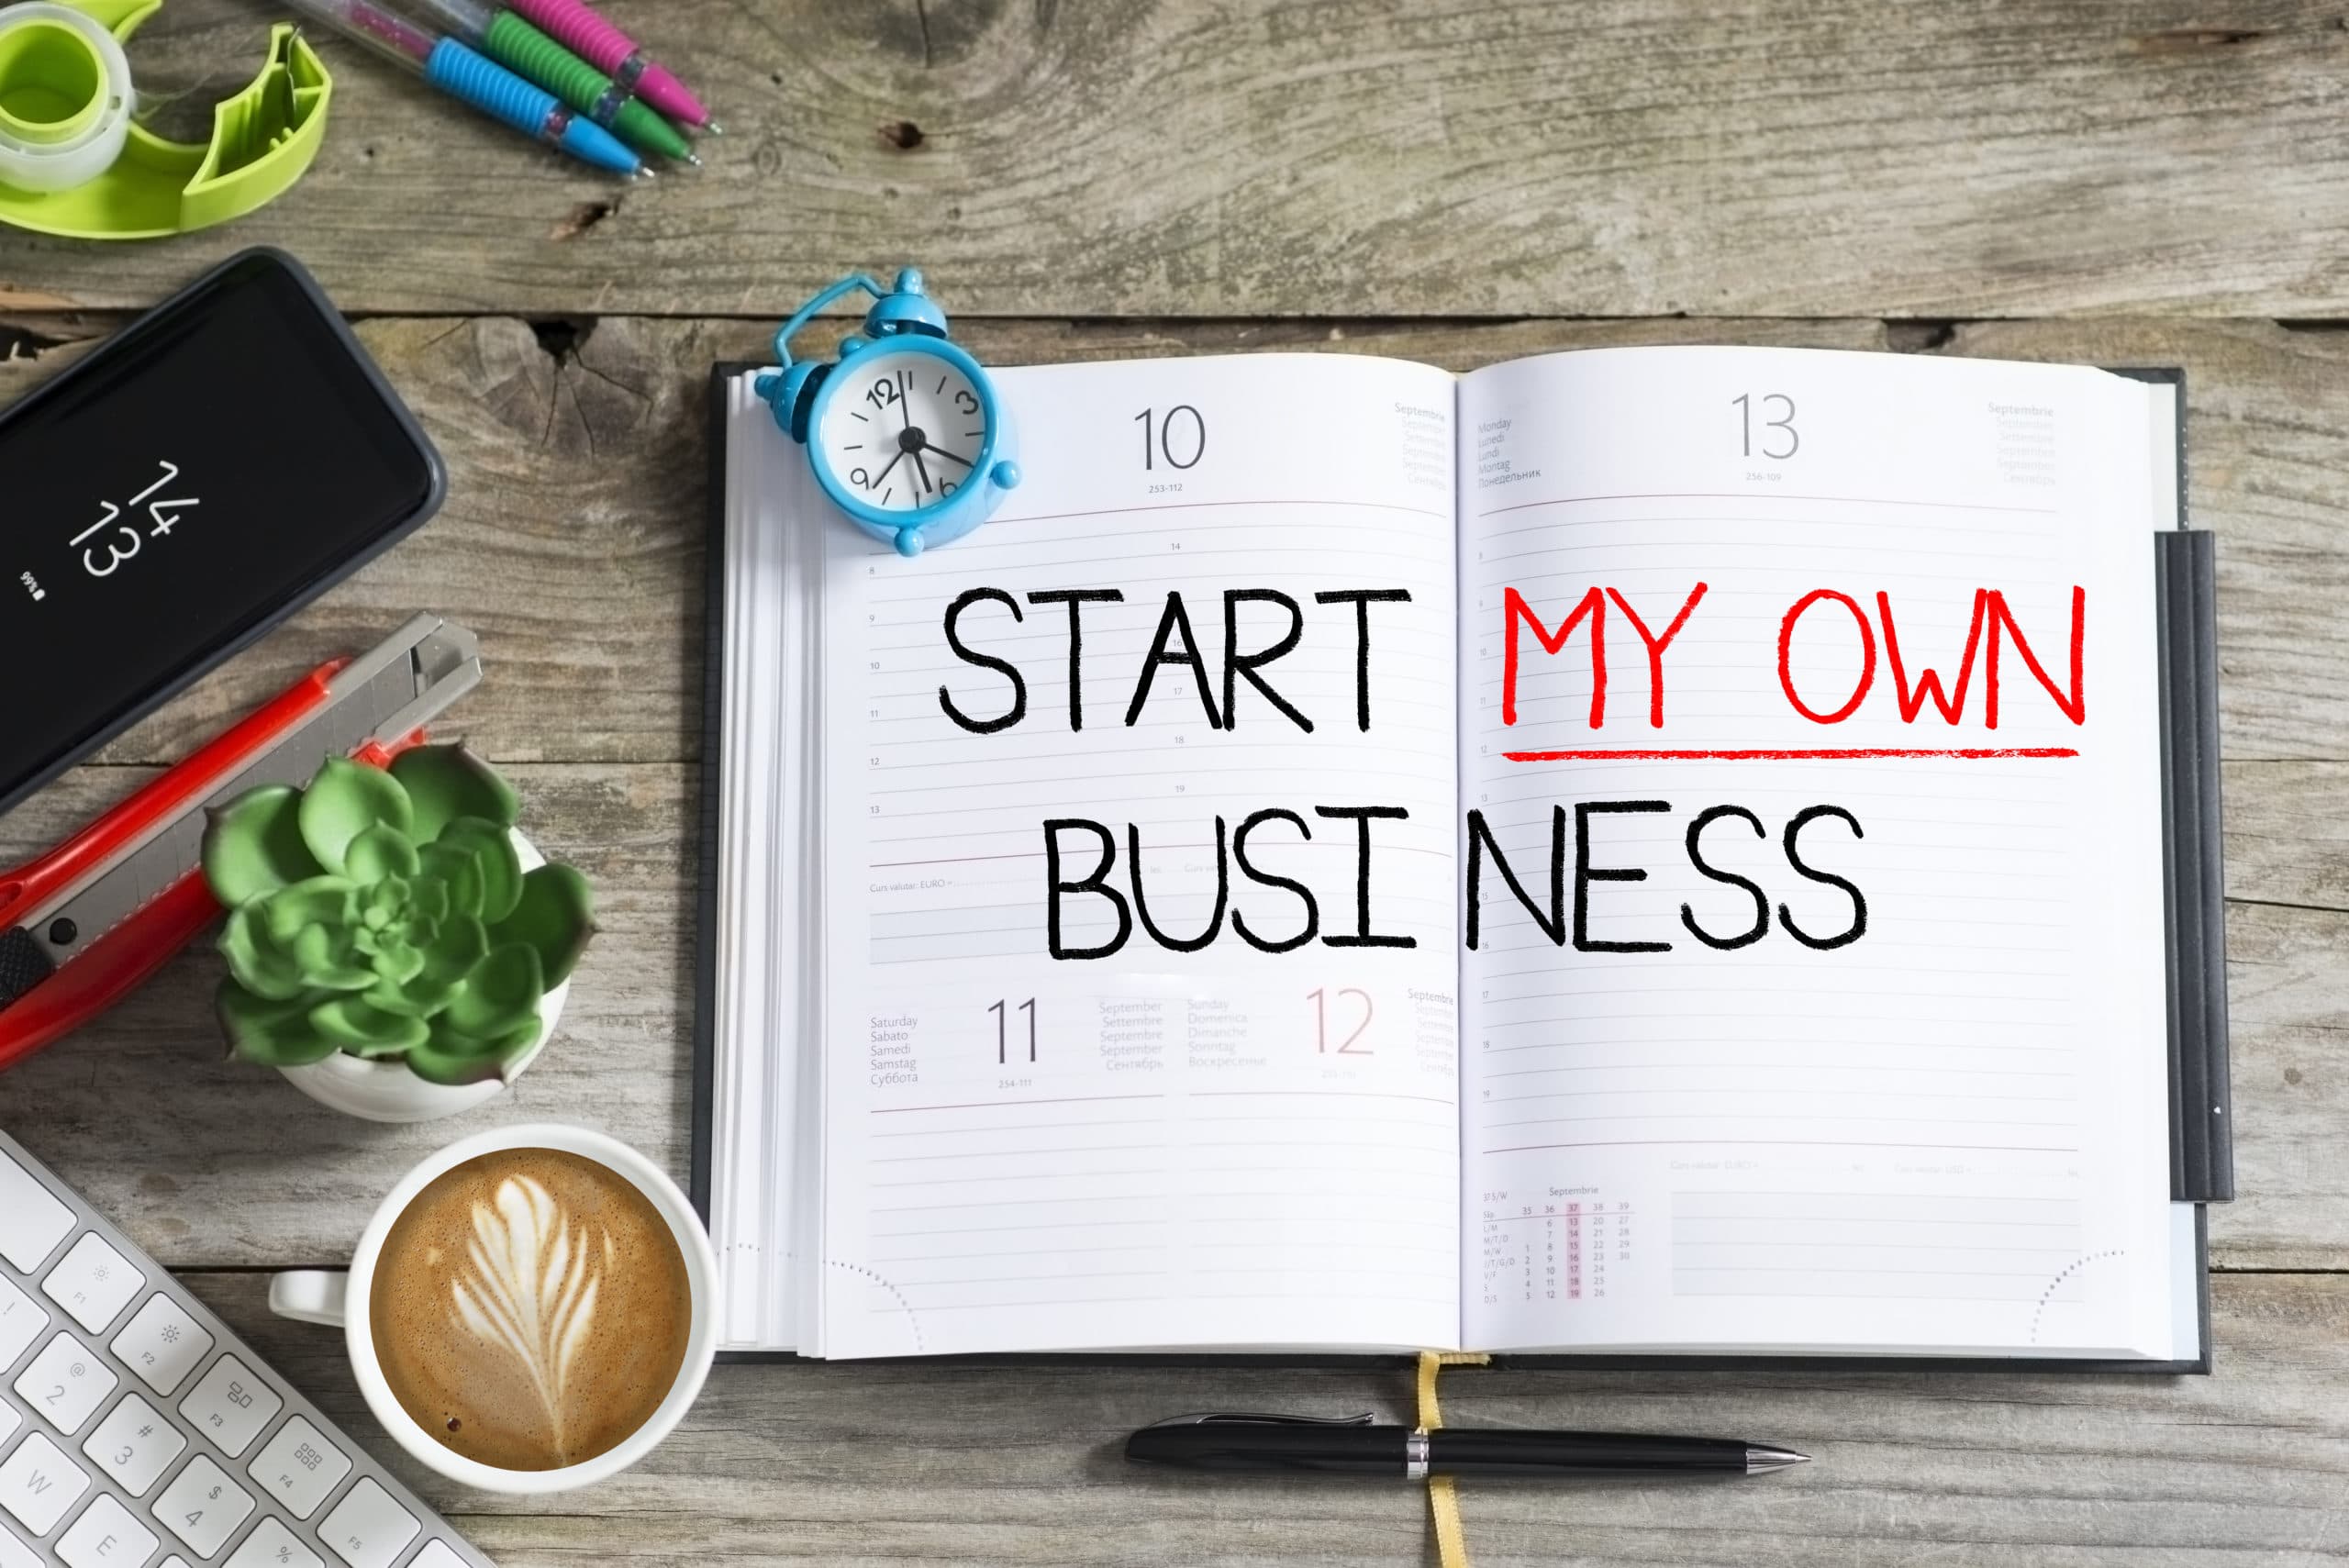 Why Start an MLM Business